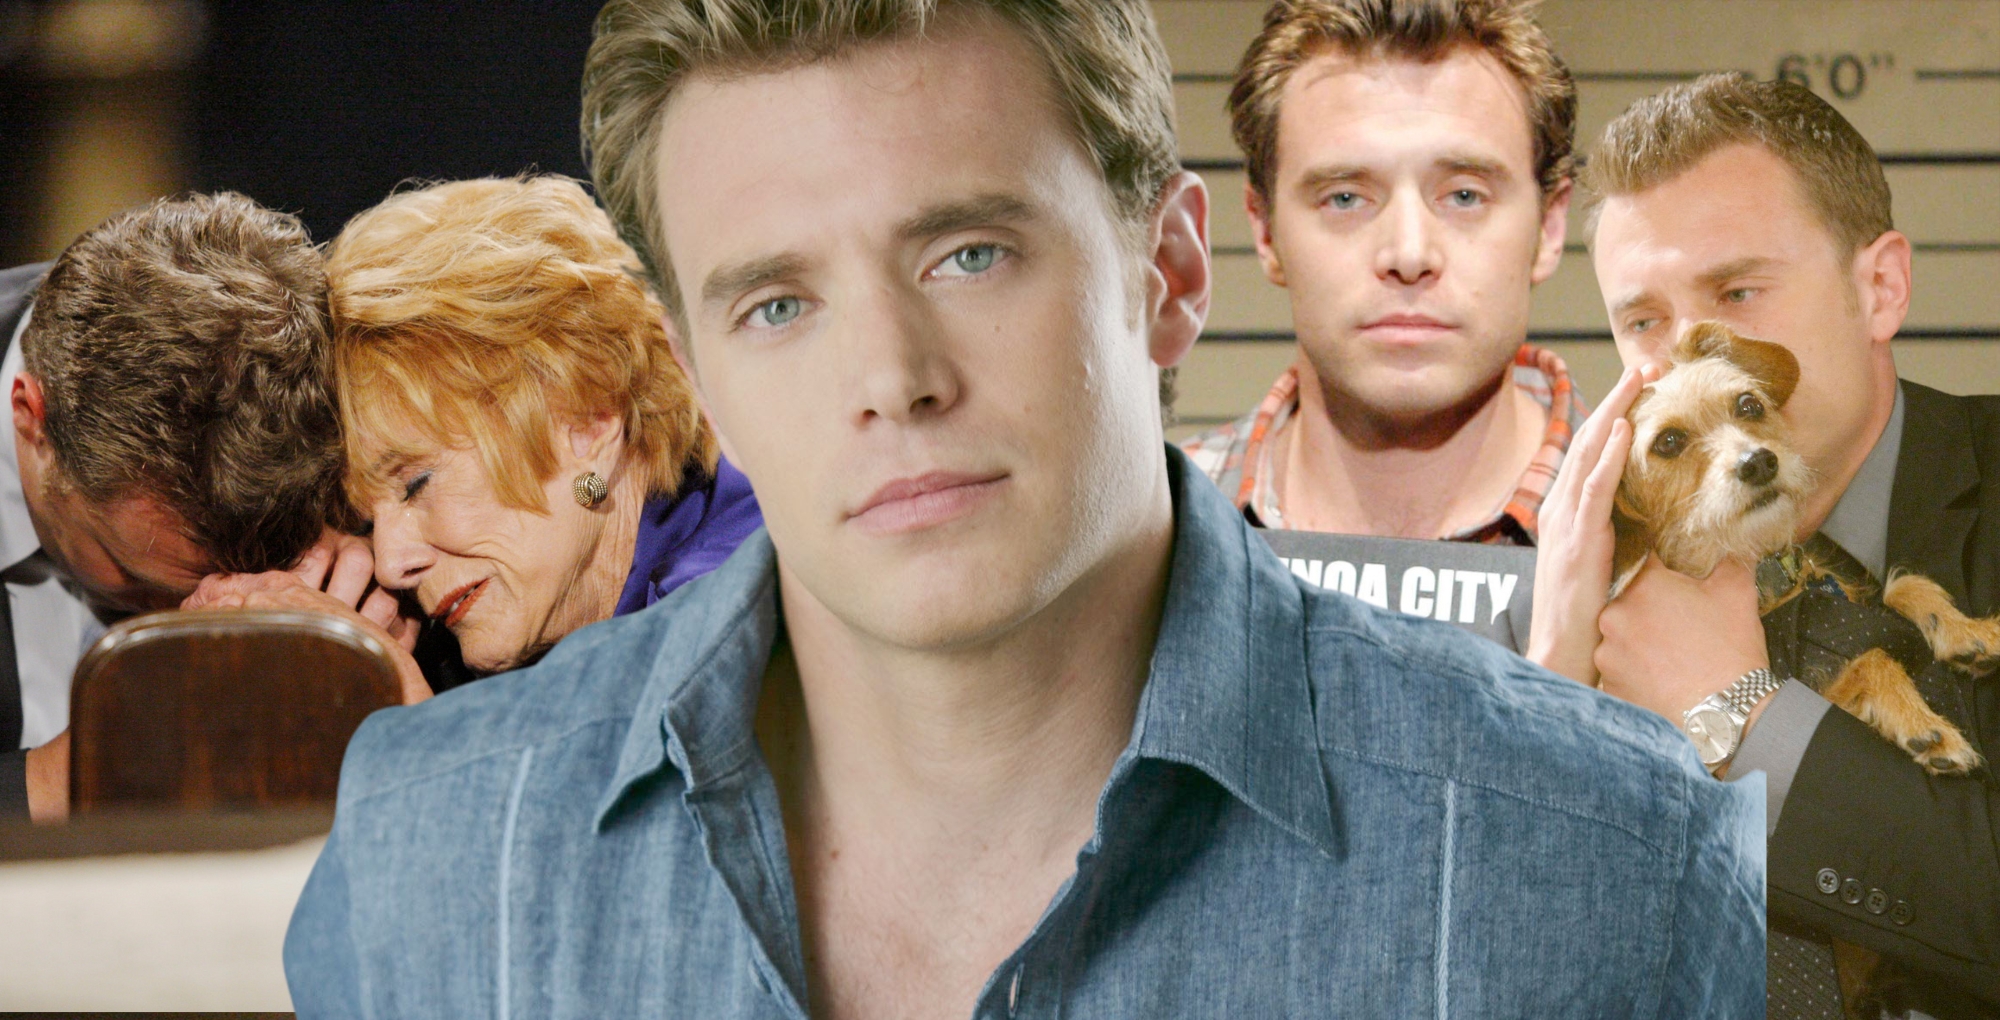 billy miller as billy abbott on the young and the restless.